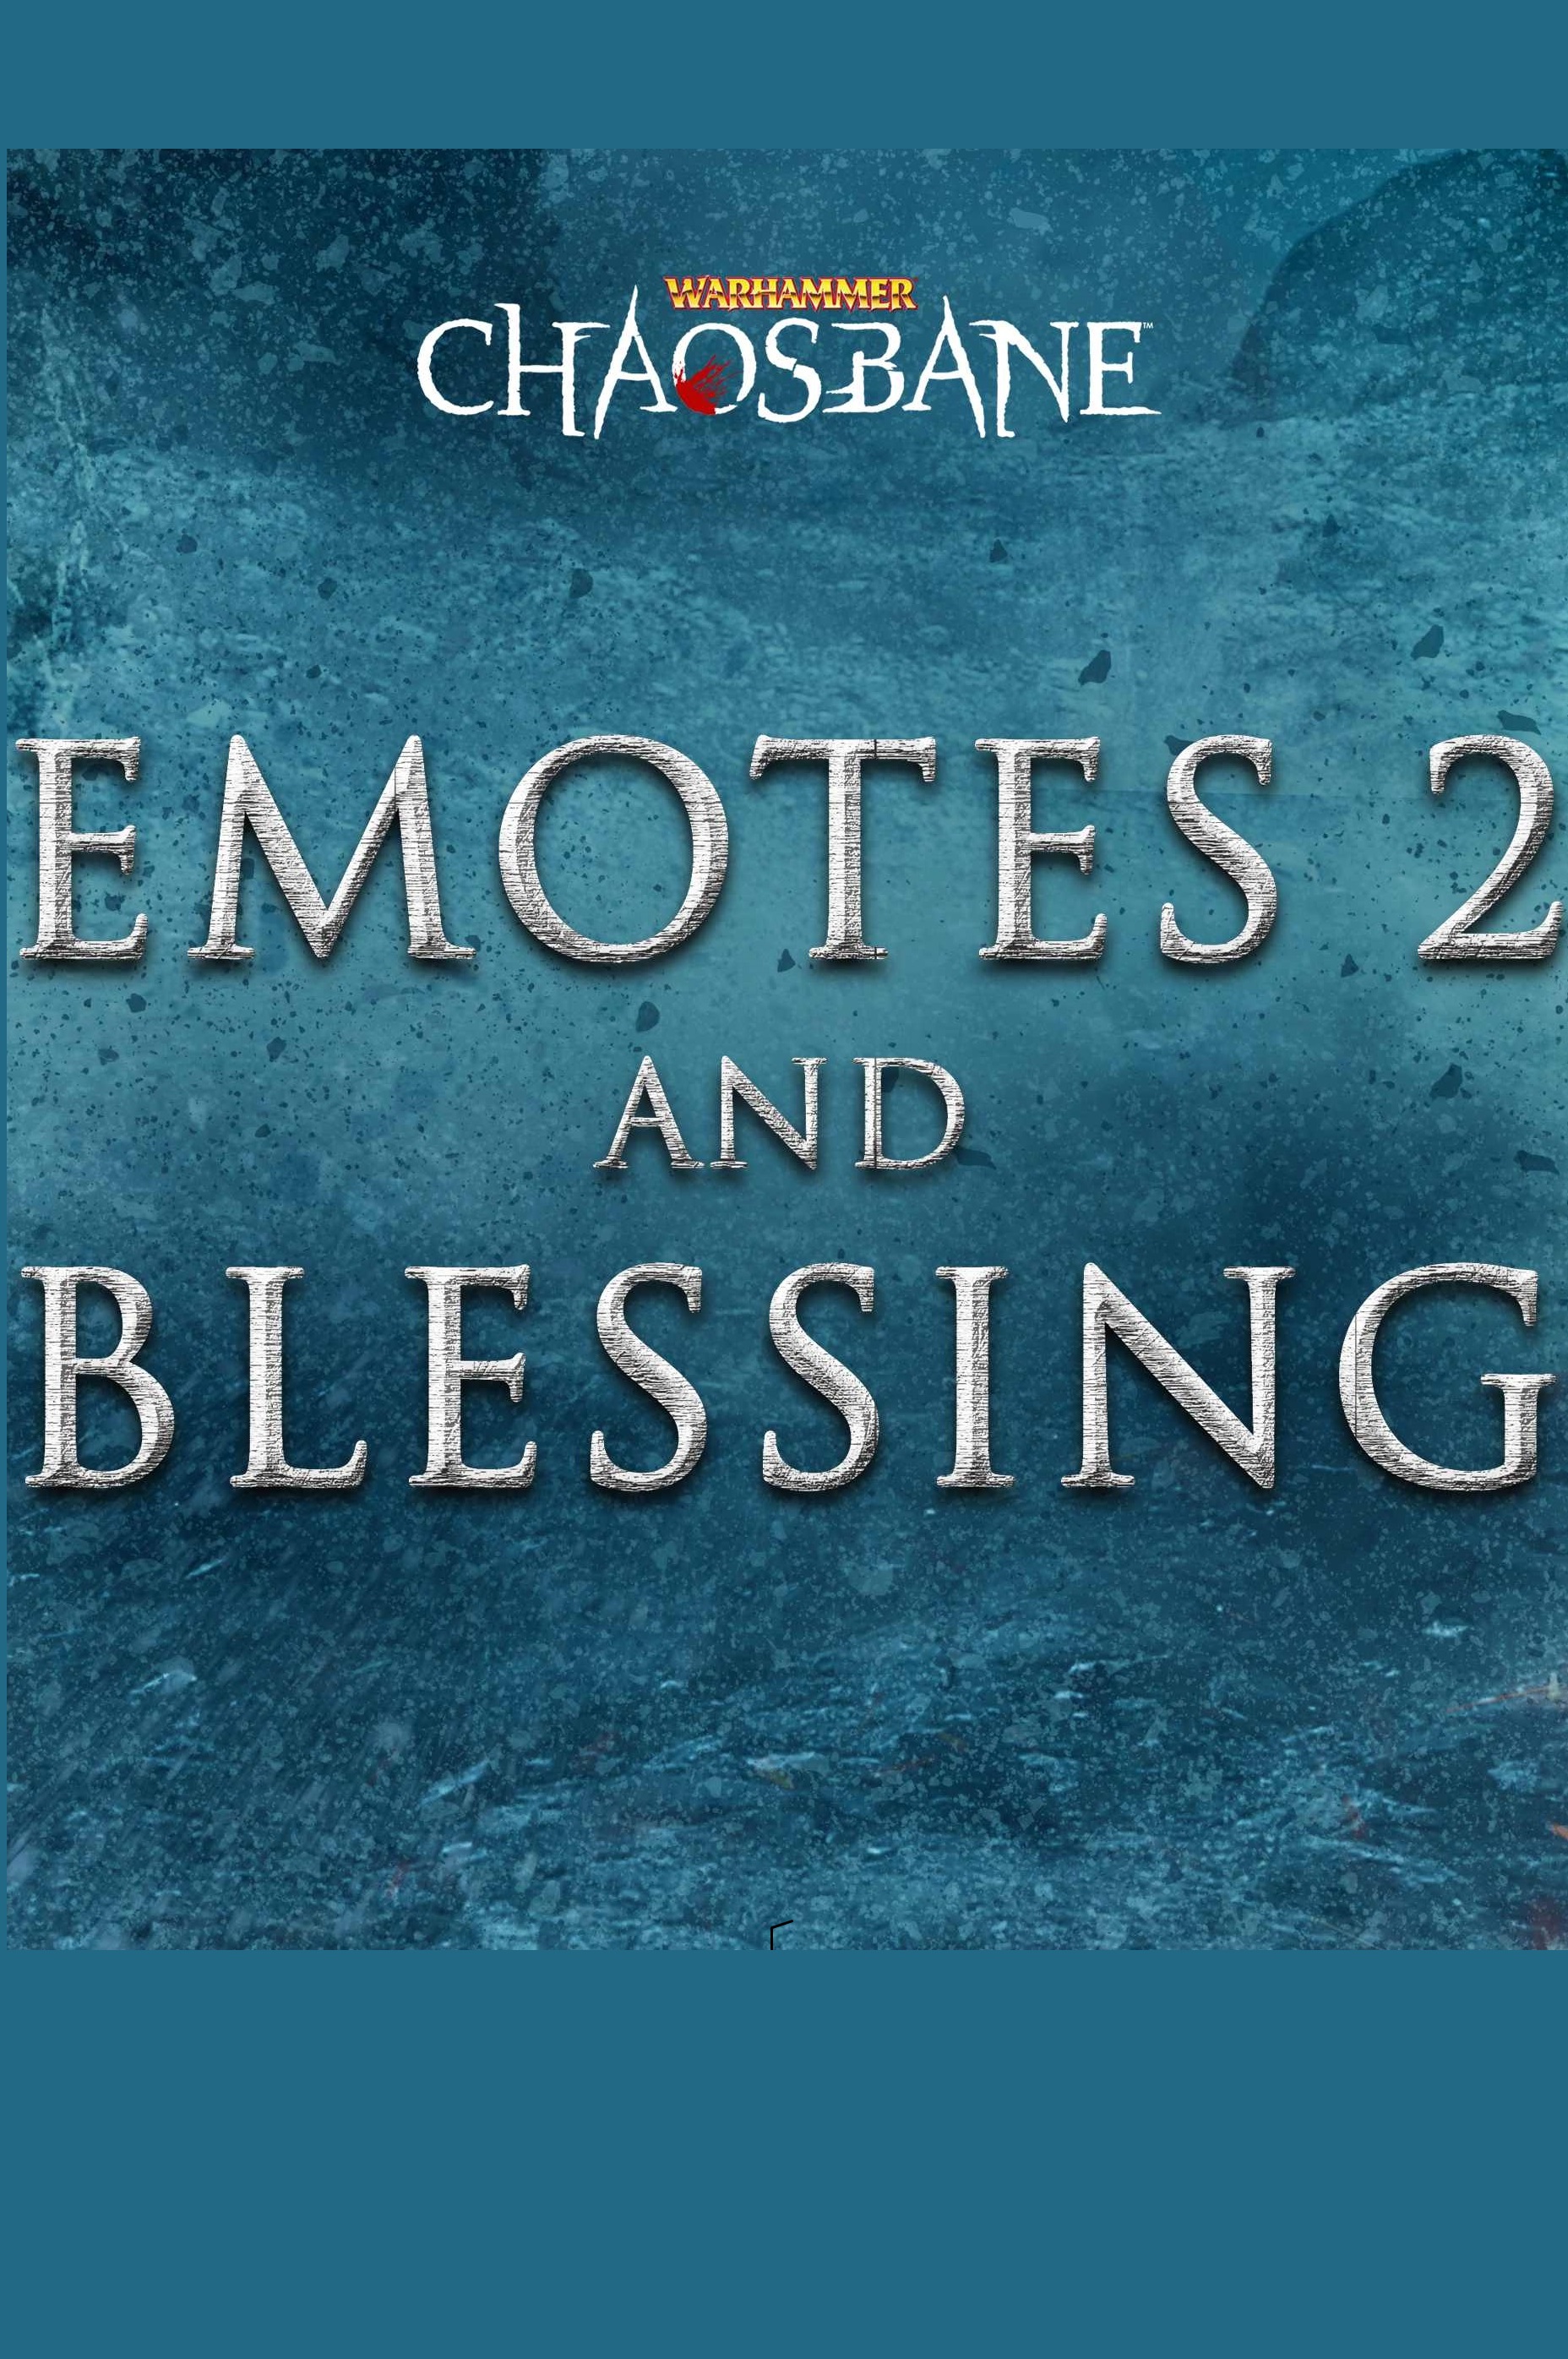 Warhammer Chaosbane Emotes 2 and blessing DLC (PC) Steam